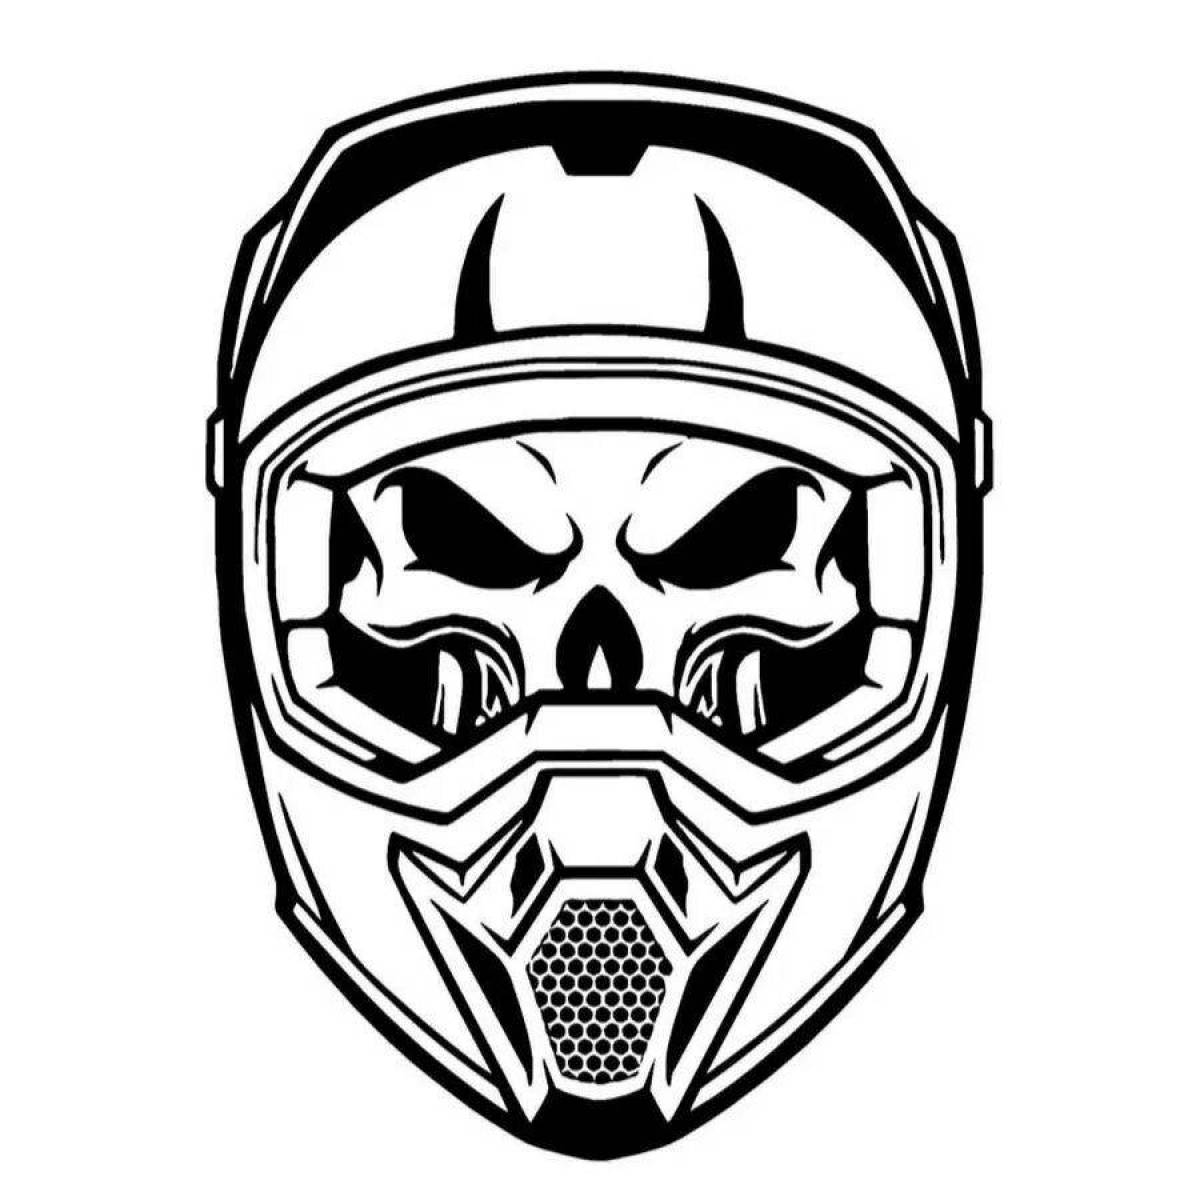 Coloring page shining motorcycle helmet